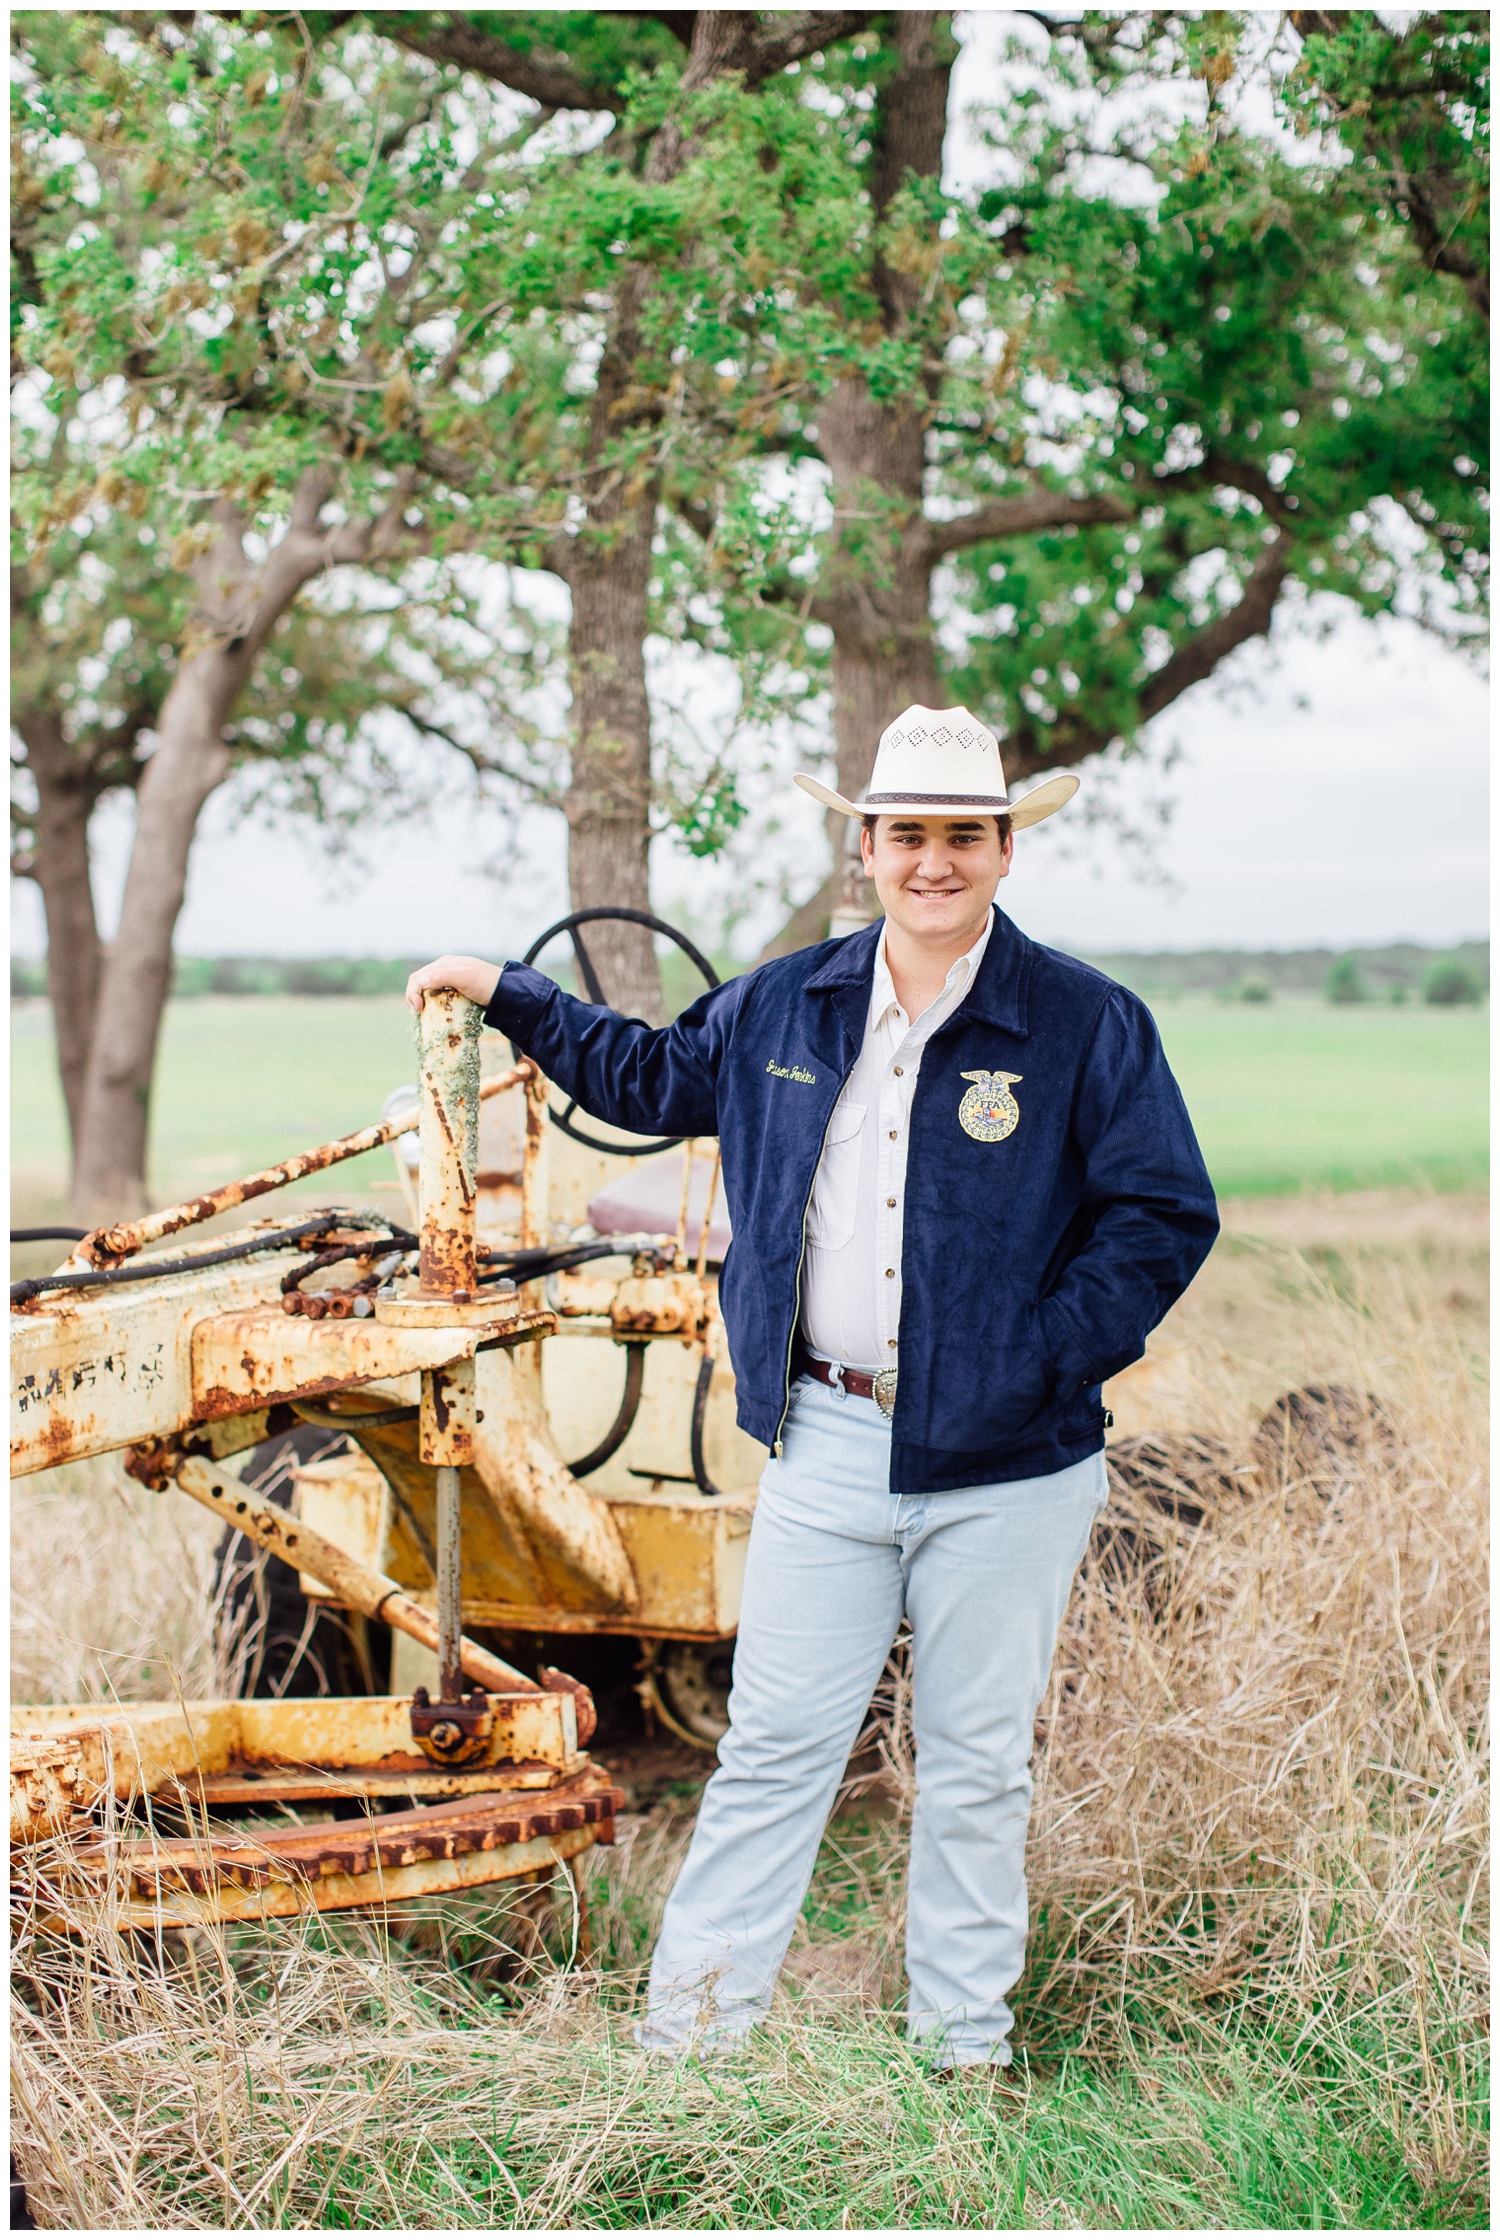 Senior Pictures for Guys at ranch outside Houston, Texas with guy holding onto a tractor in jeans and cowboy hat